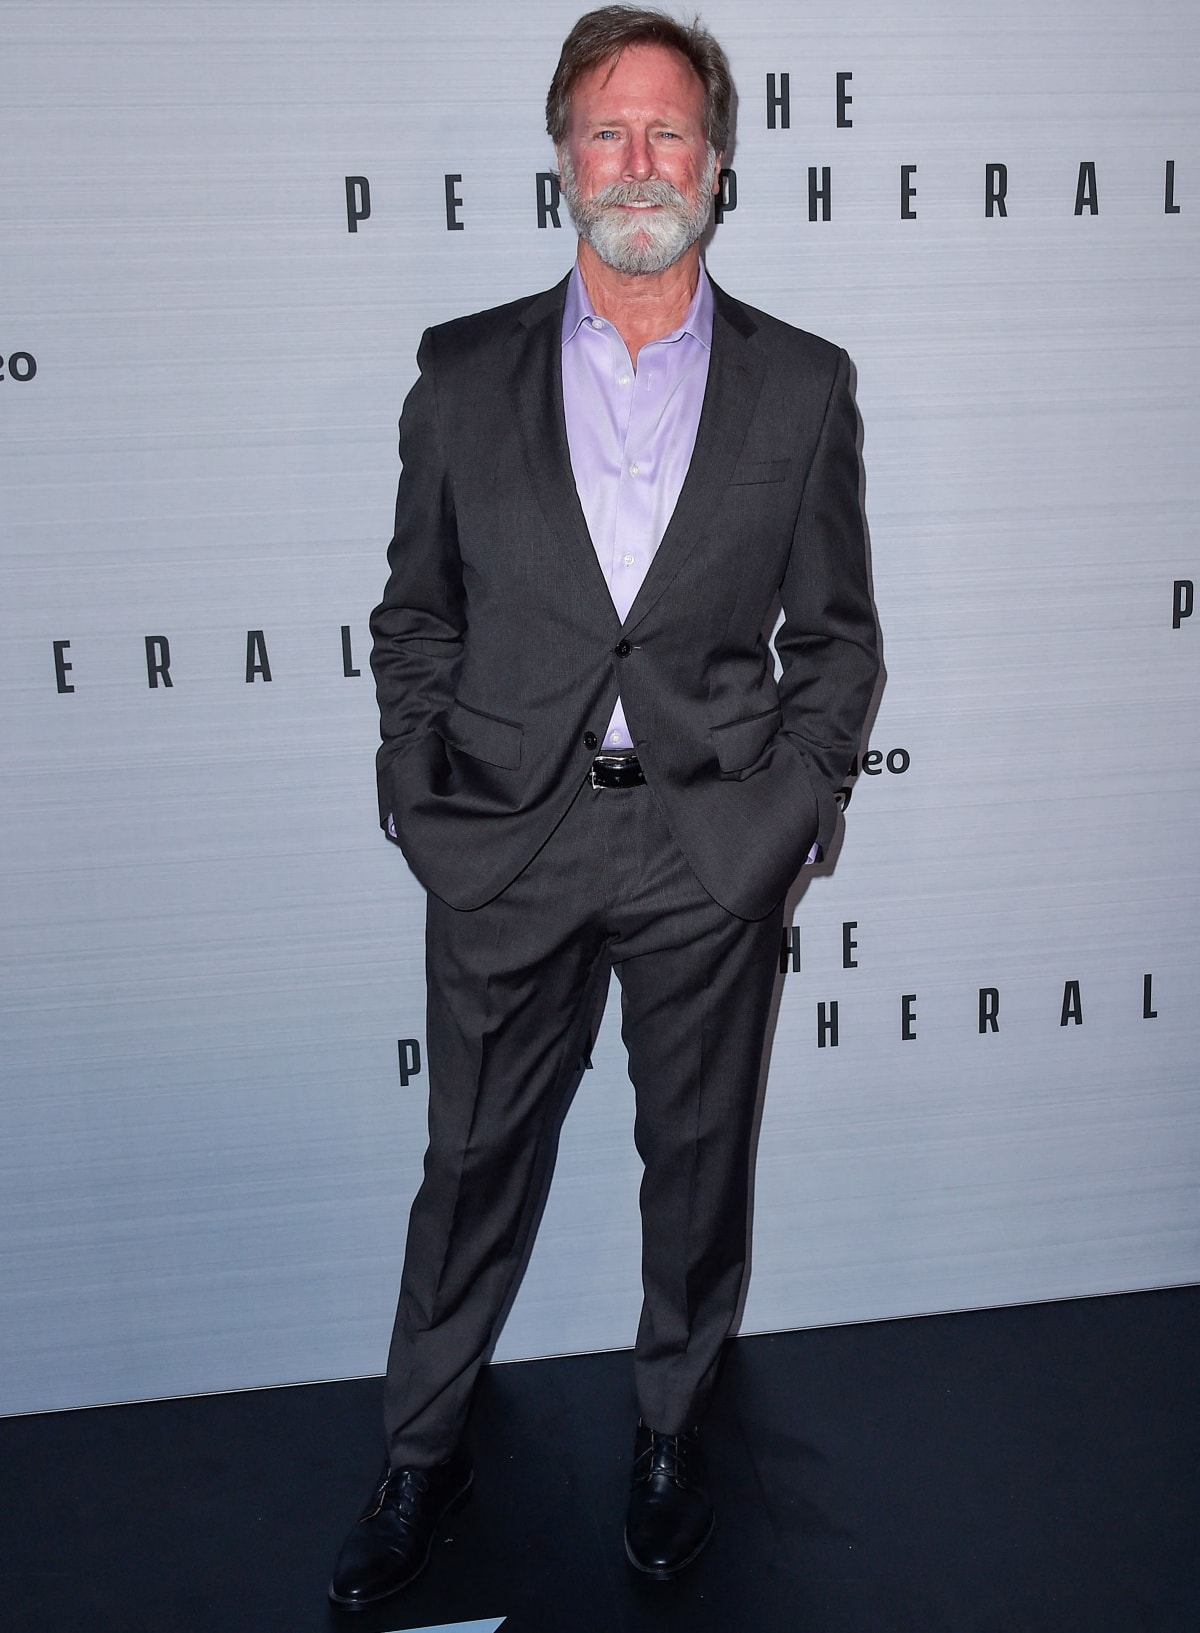 Louis Herthum attending the Los Angeles premiere of The Peripheral